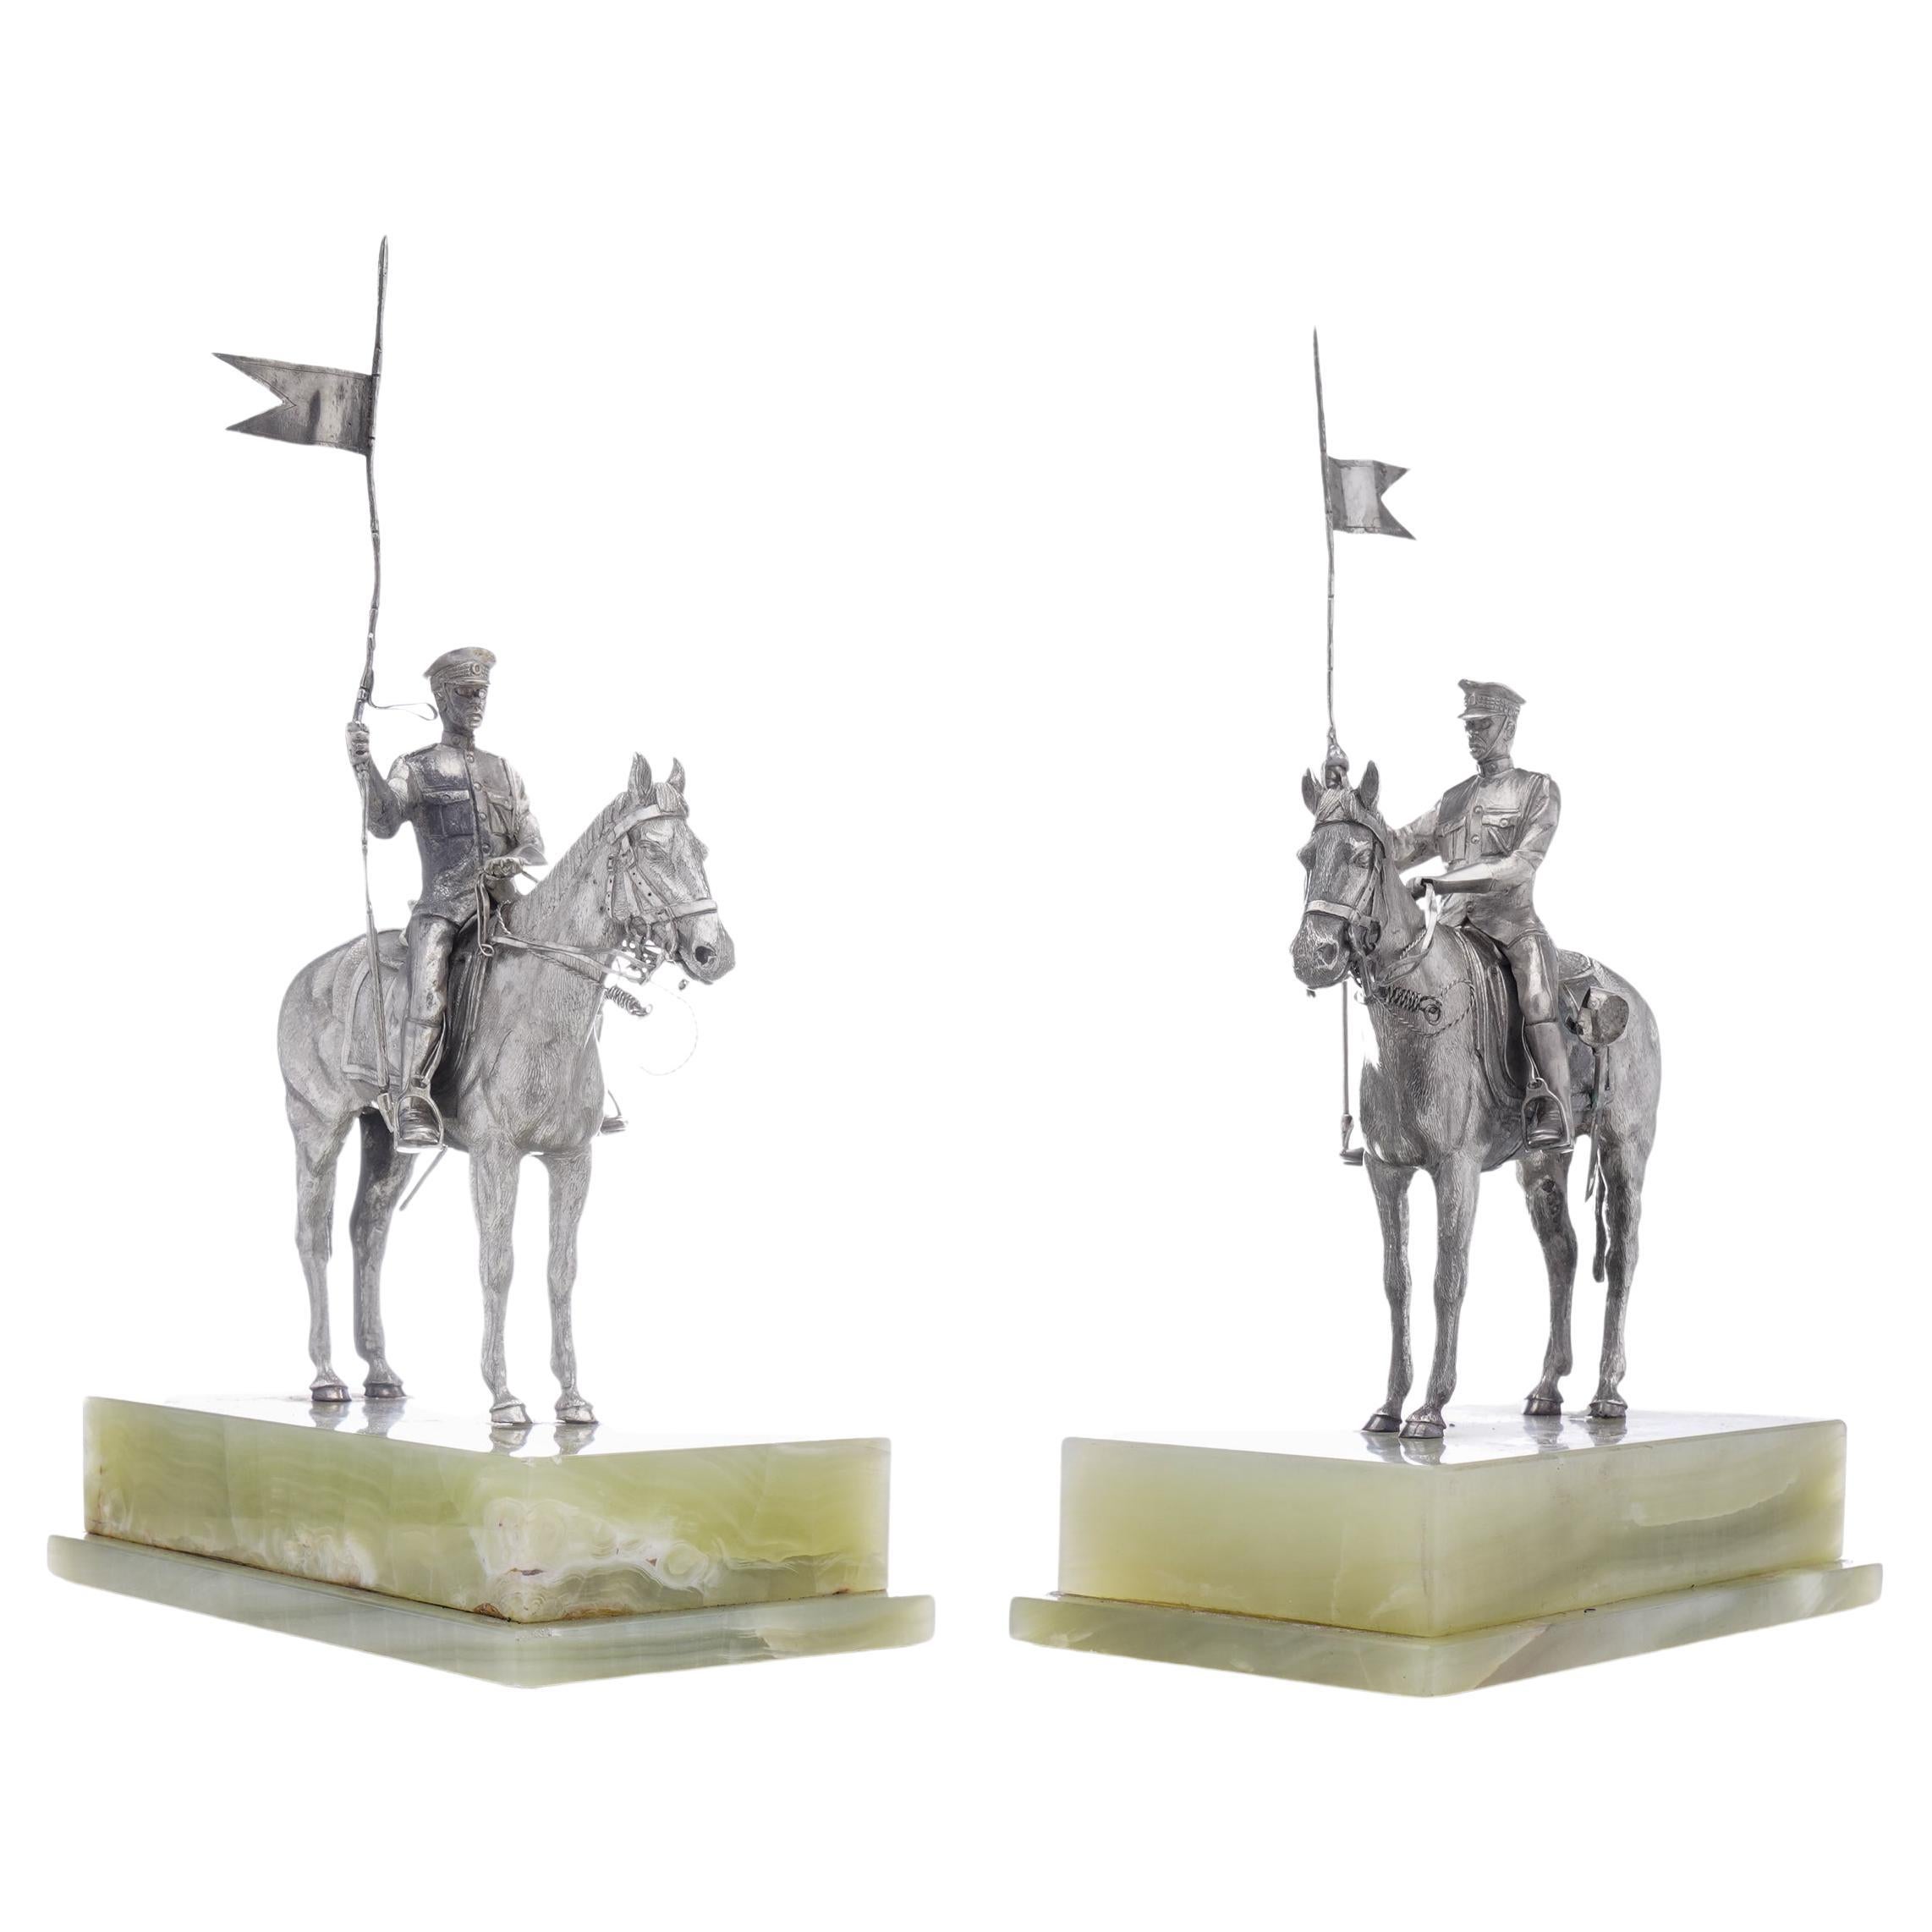 Asprey Pair or Horseriding Solid Silver Figurines on Marble Bases, London, 1977 For Sale